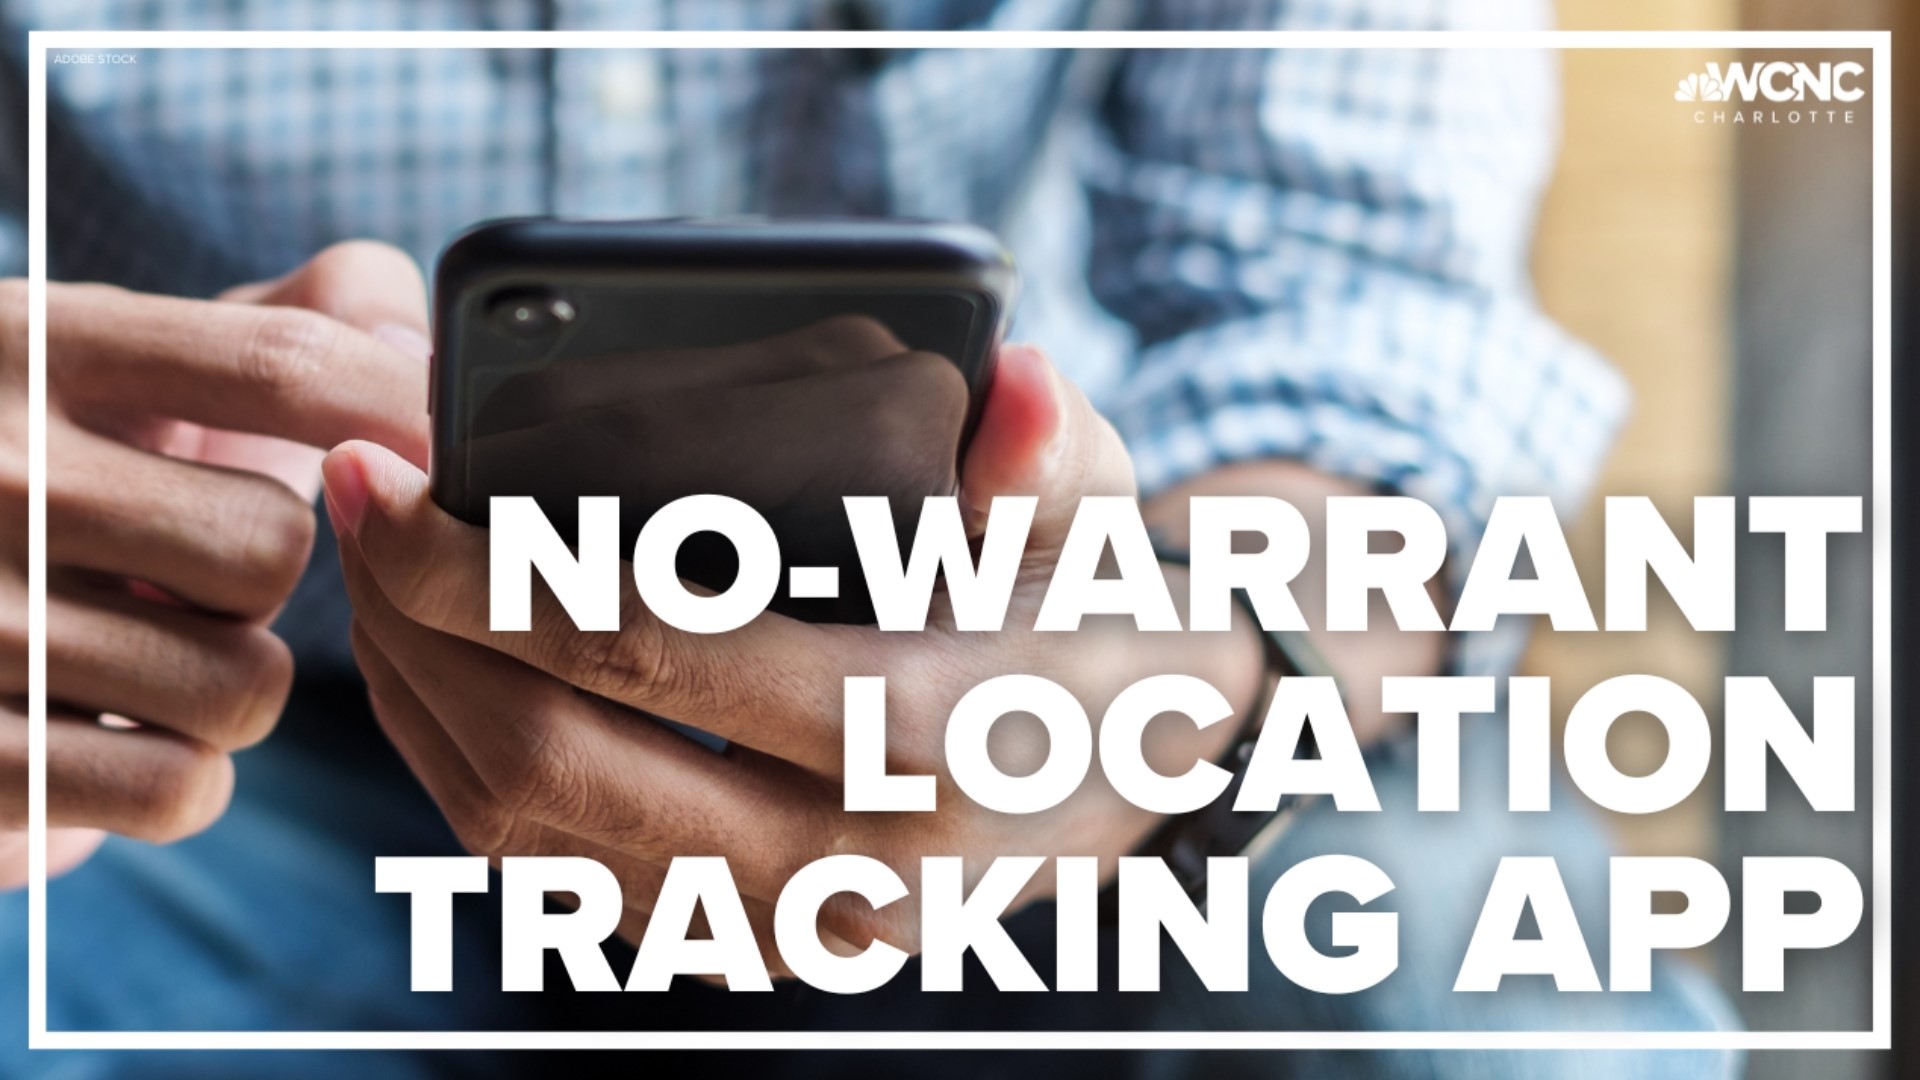 Law enforcement across the U.S., including North Carolina, have been using an obscure phone tracking tool to follow people's movements without search warrants.